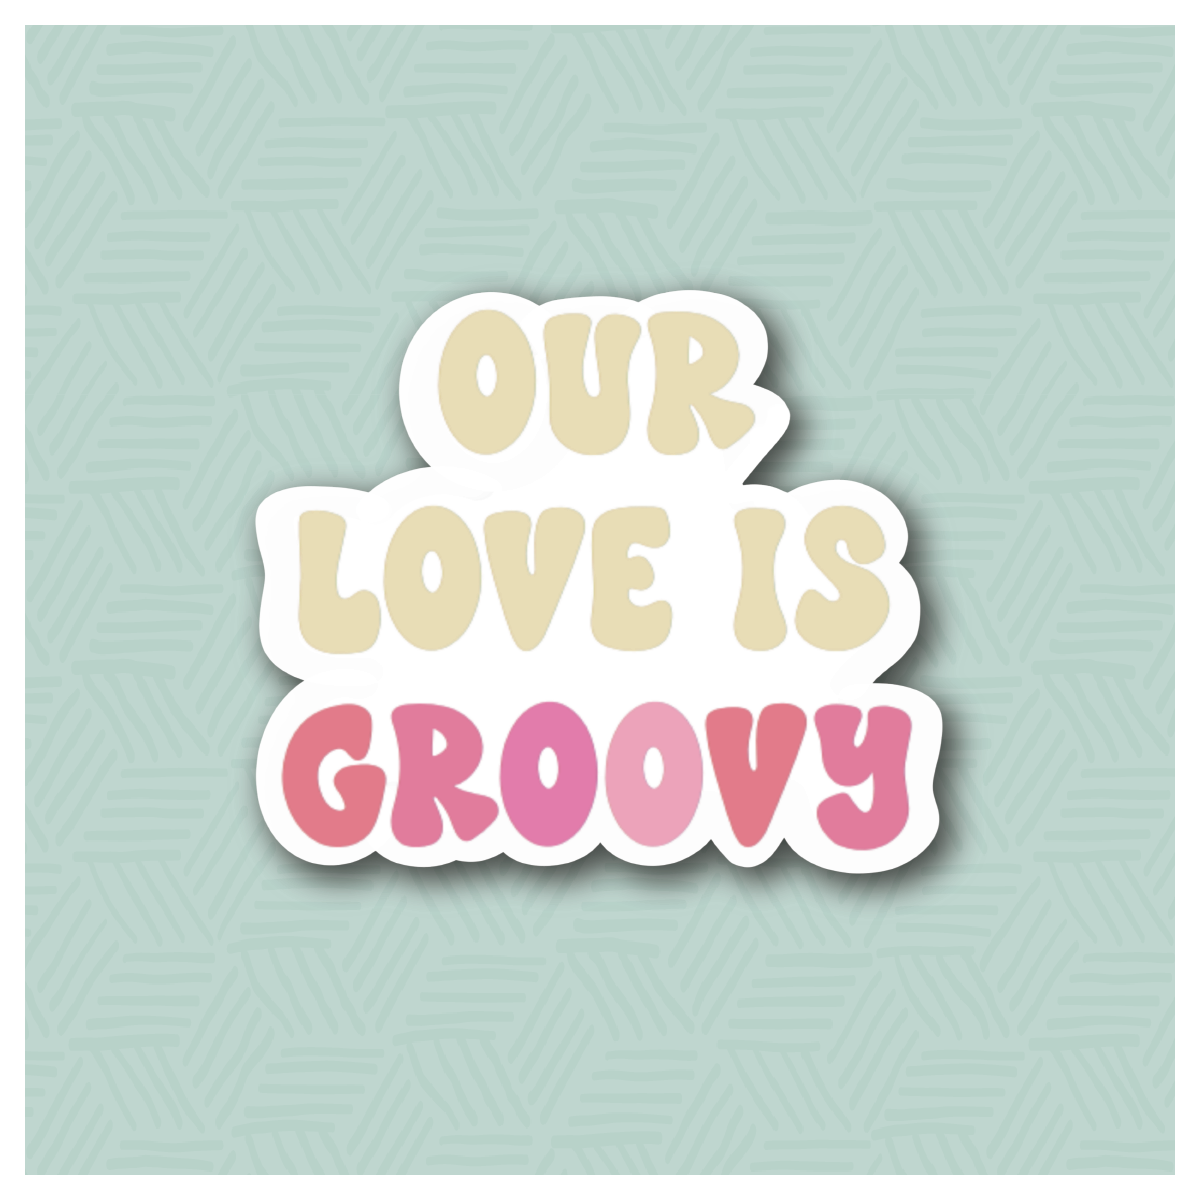 Our Love is Groovy Hand Lettered Cookie Cutter